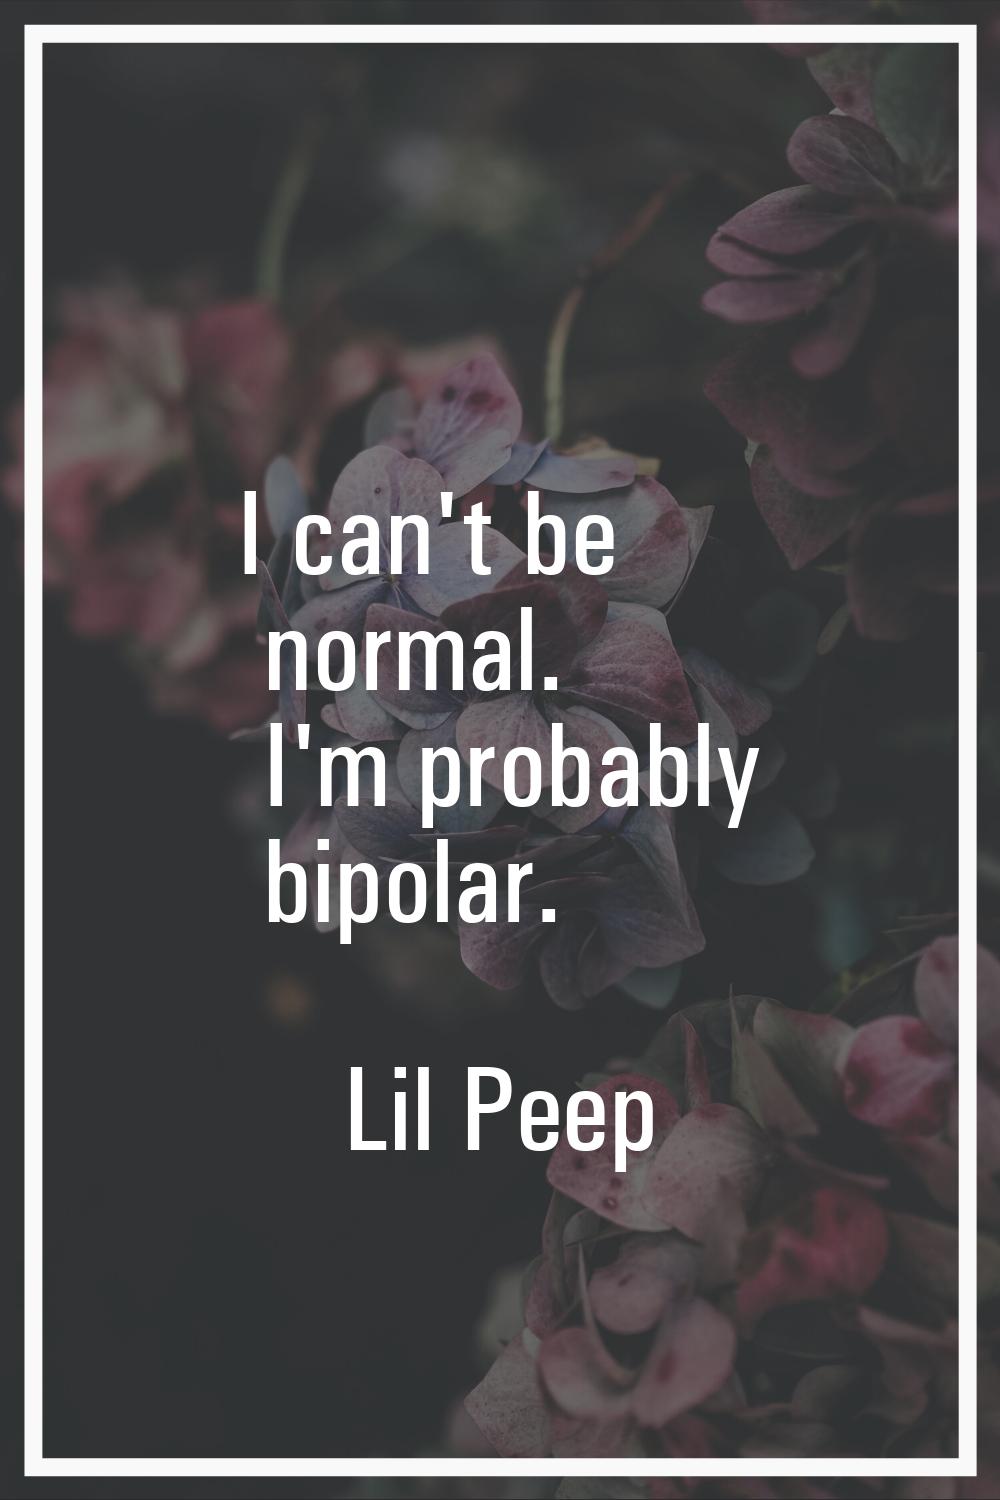 I can't be normal. I'm probably bipolar.